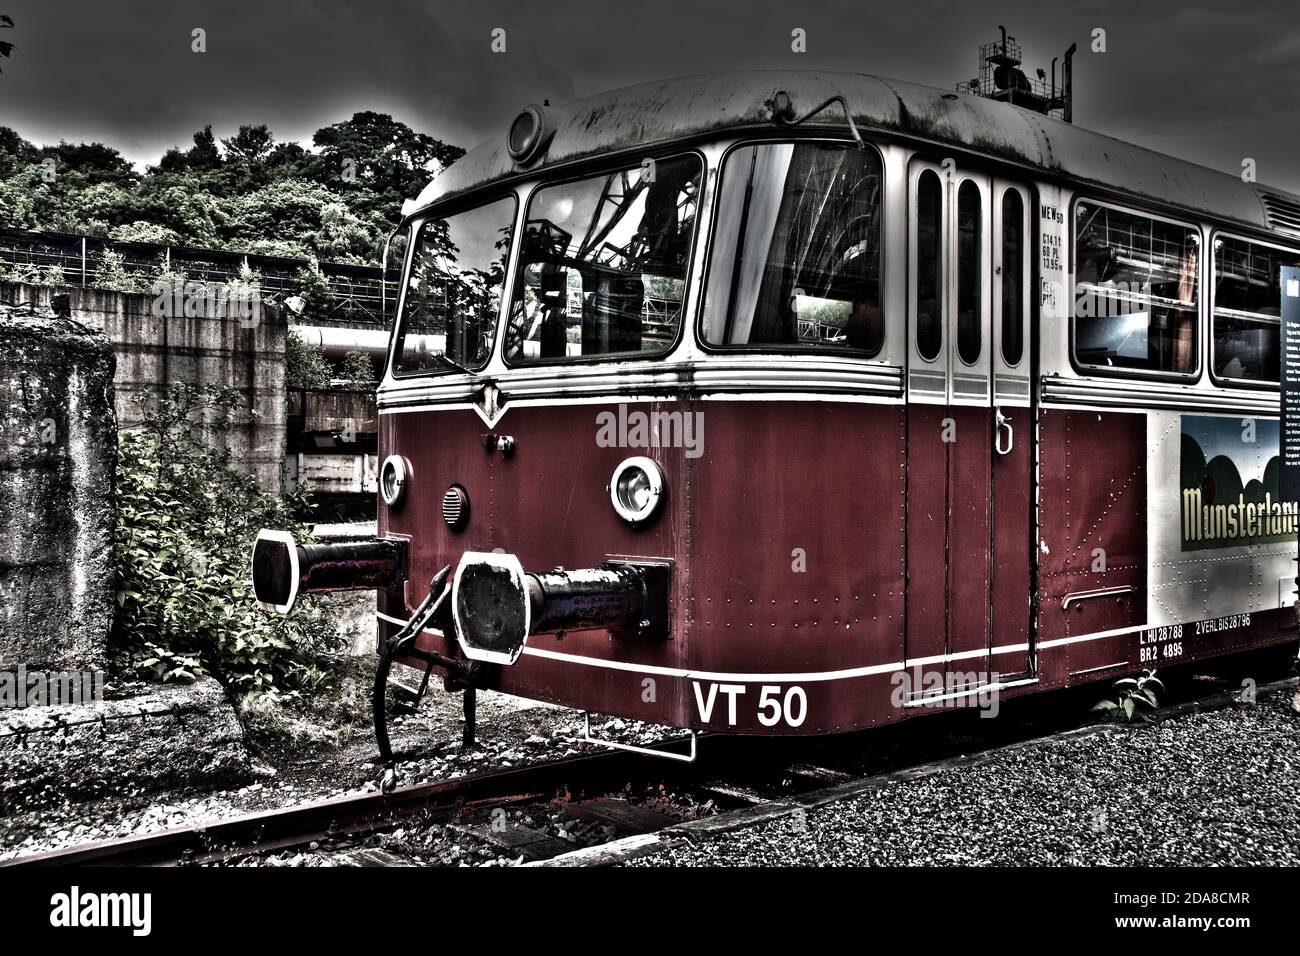 Rail bus train from the 60s Stock Photo